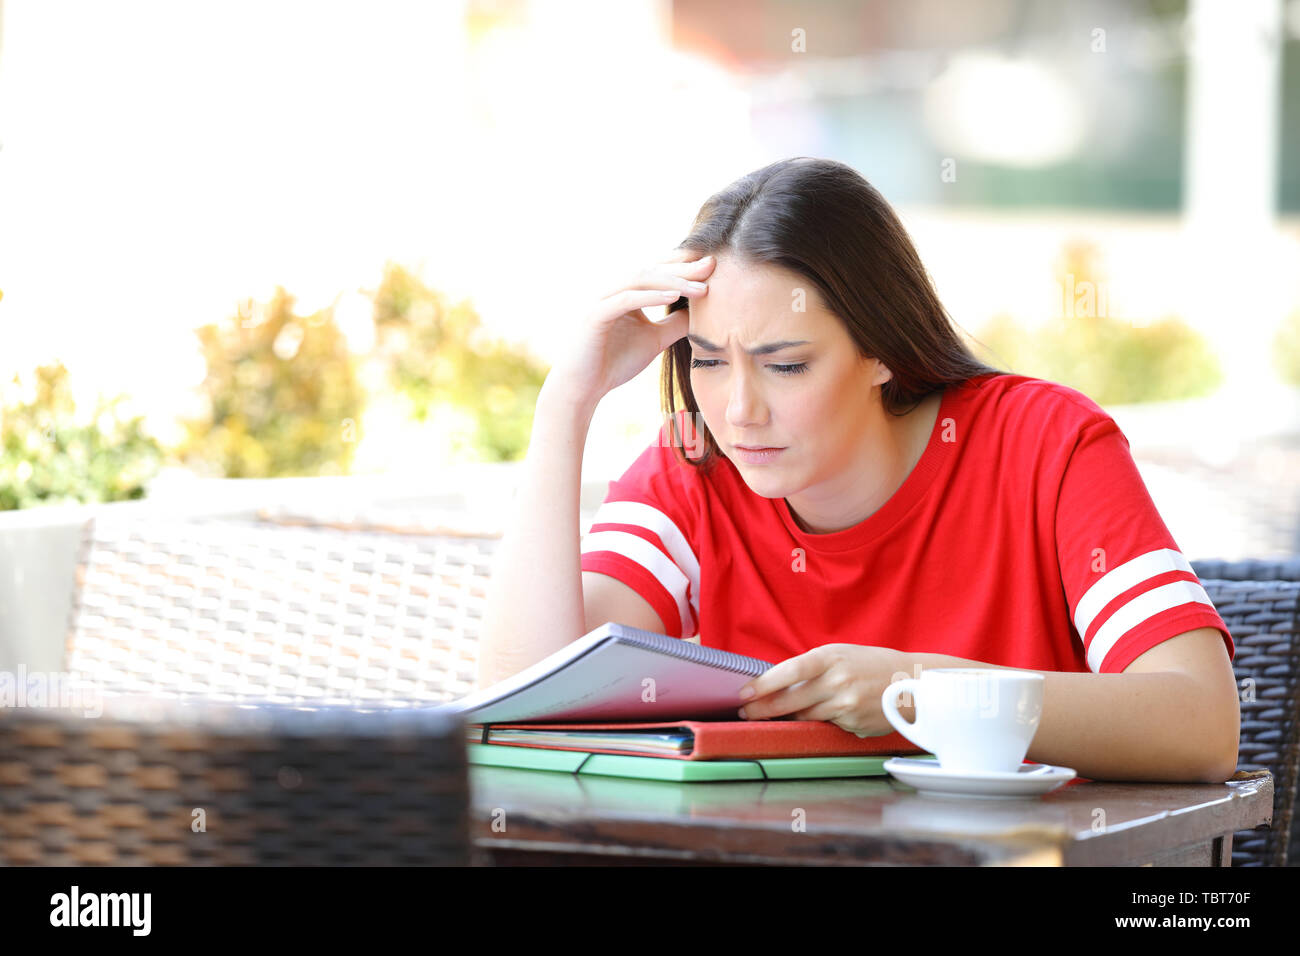 Worried student trying to understand lesson reading notes sitting in a coffee shop terrace Stock Photo